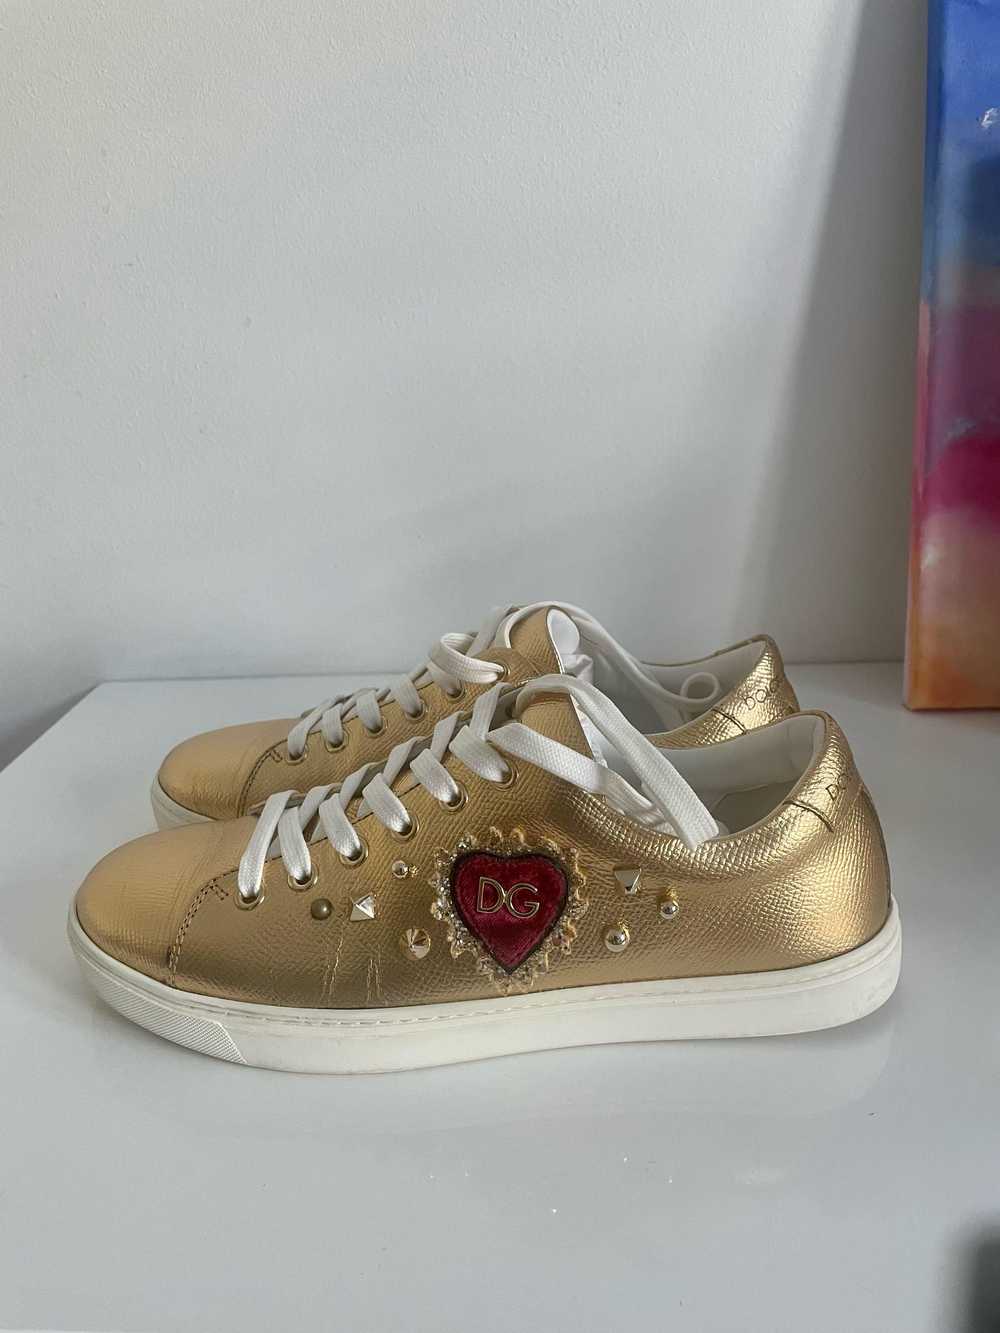 Dolce & Gabbana Gold Leather Devotion Sneakers - image 3